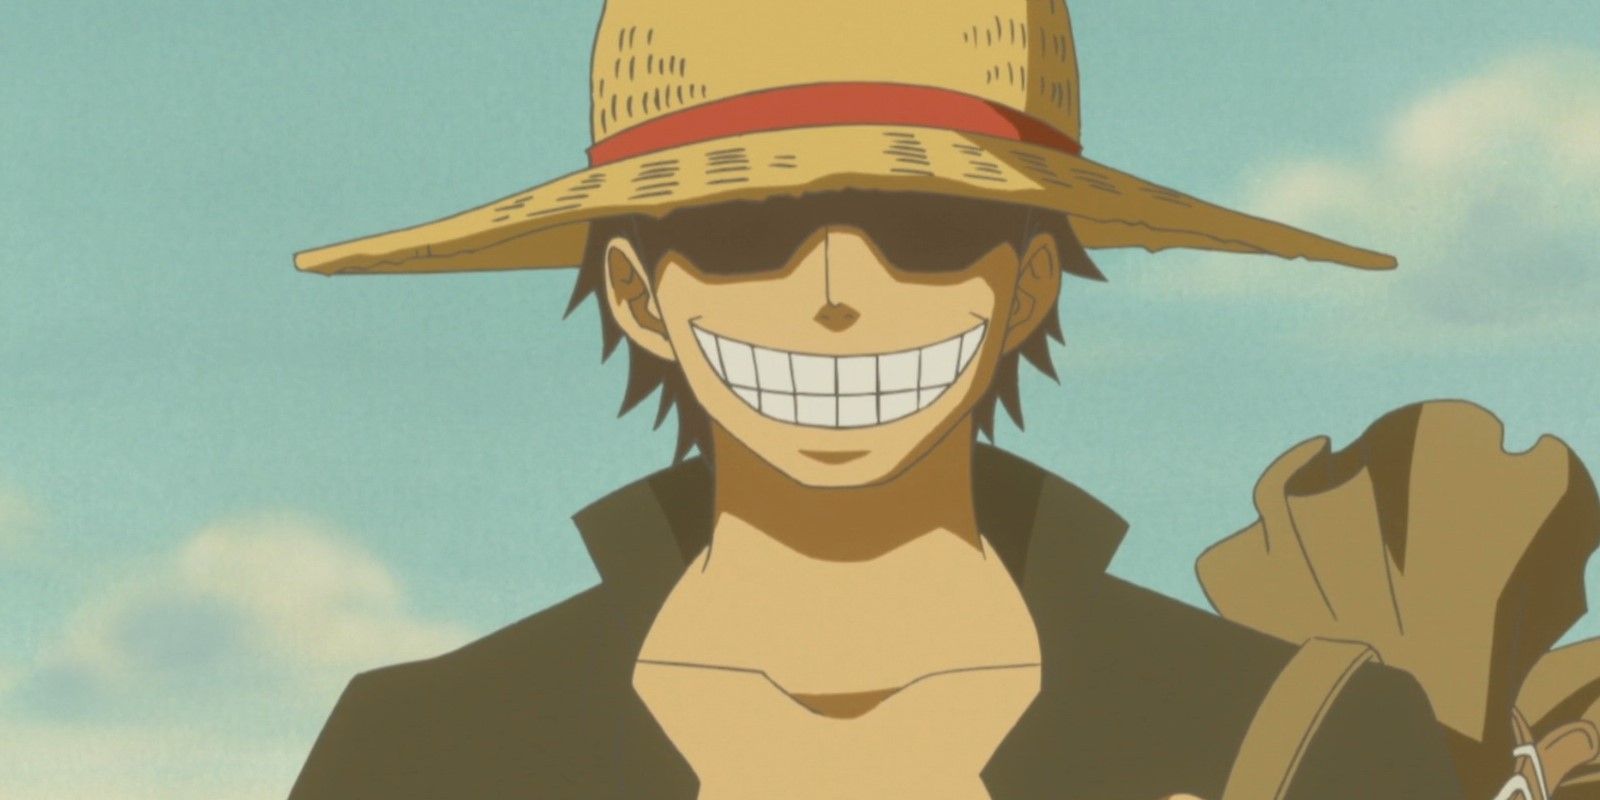 One Piece Gol D. Roger wearing the iconic straw hat